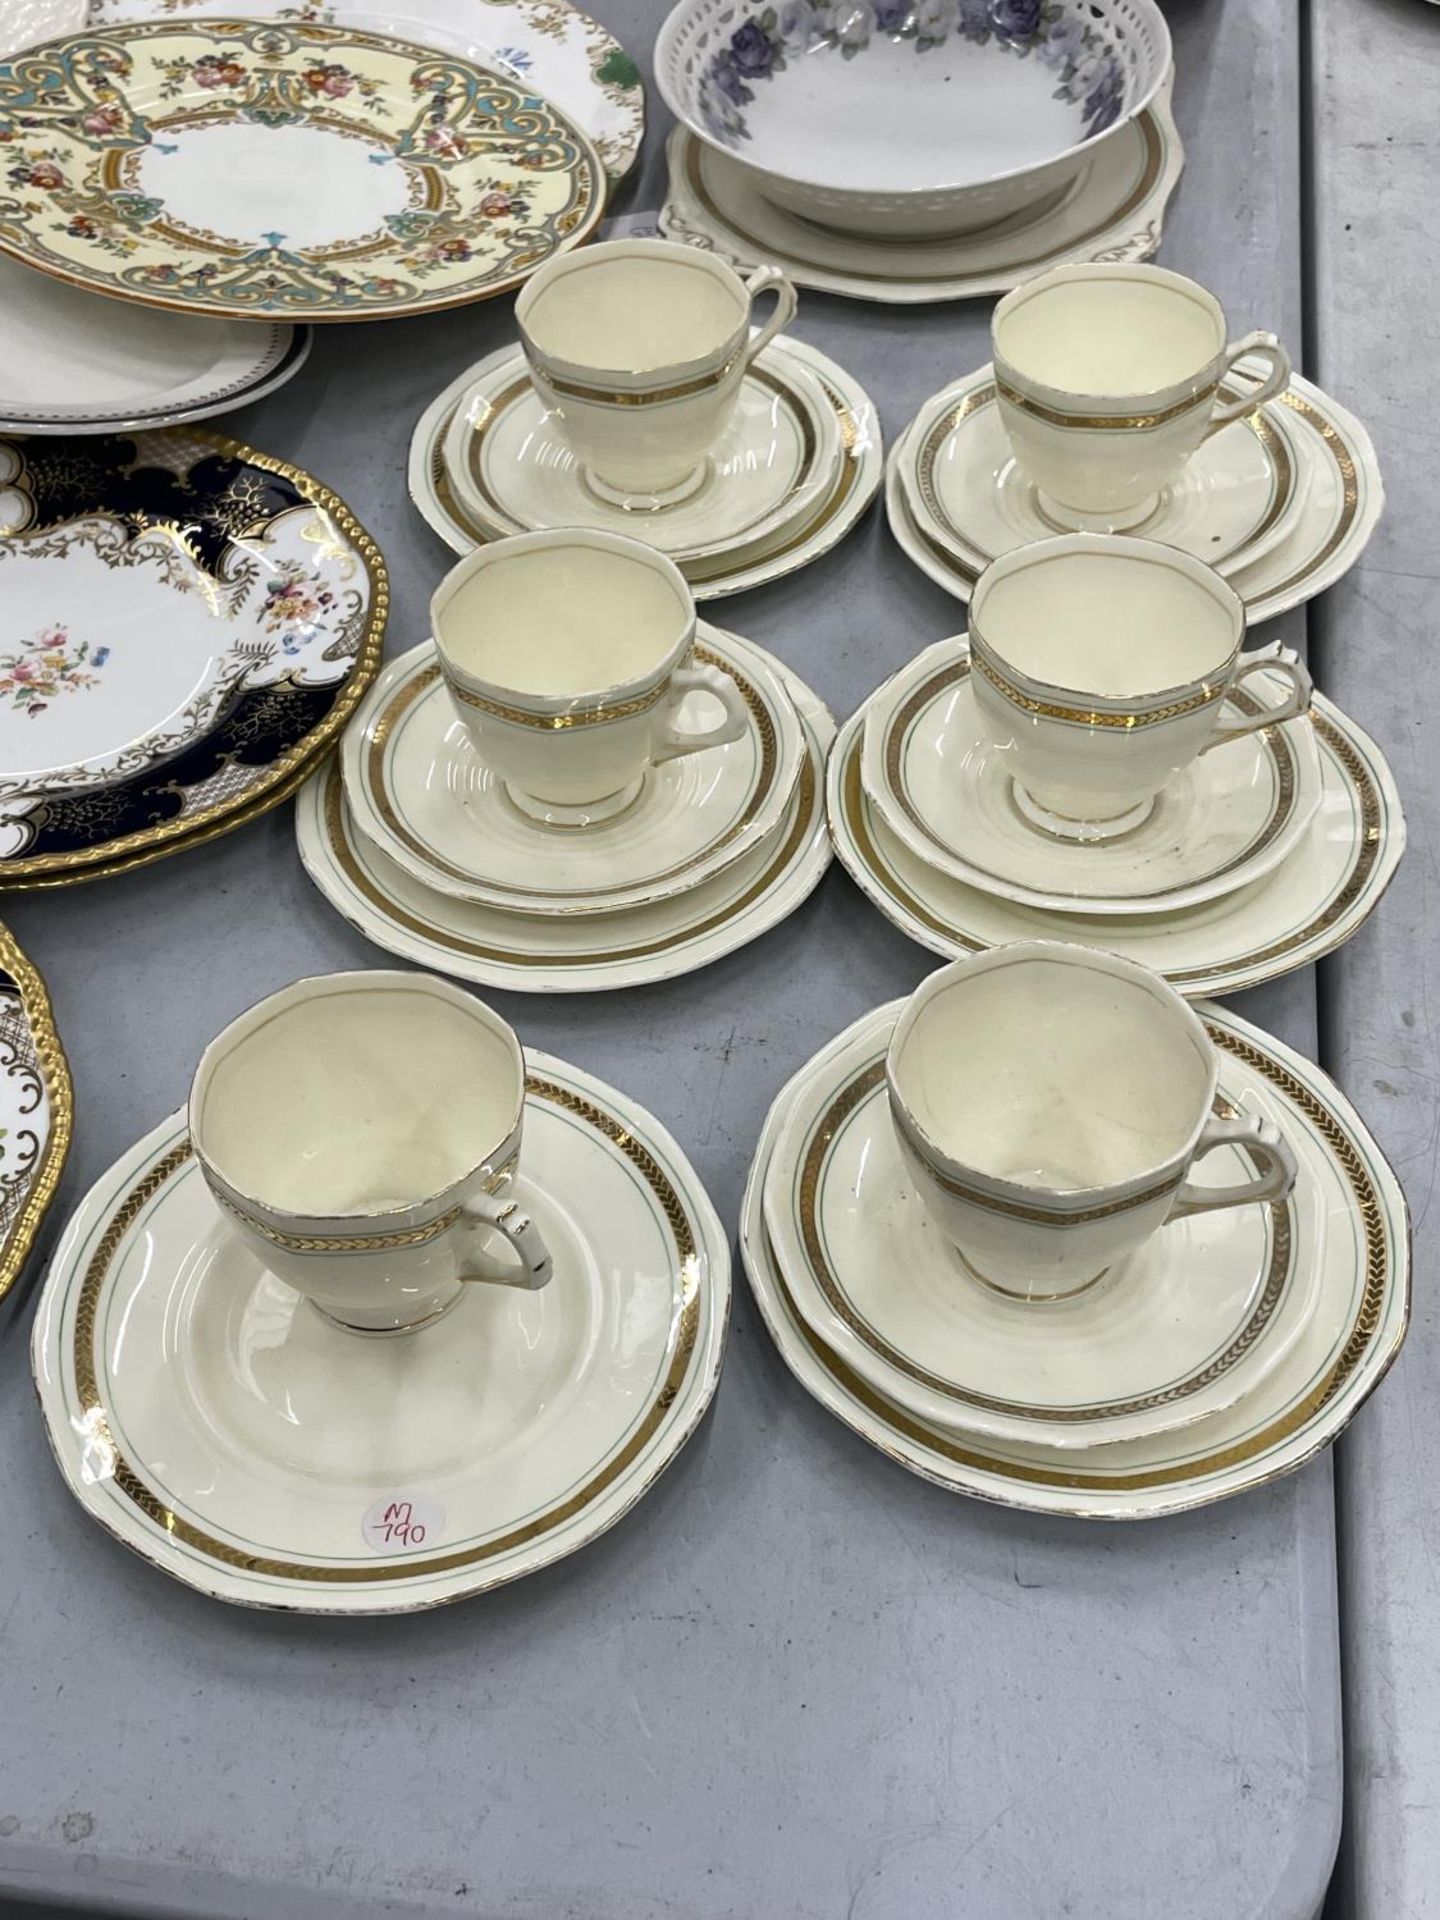 SIX TUSCAN CHINA PLANT CUPS, SAUCERS AND SIDE PLATES PLUS A QUANTITY OF COLLECTABLE PLATES TO - Image 5 of 7